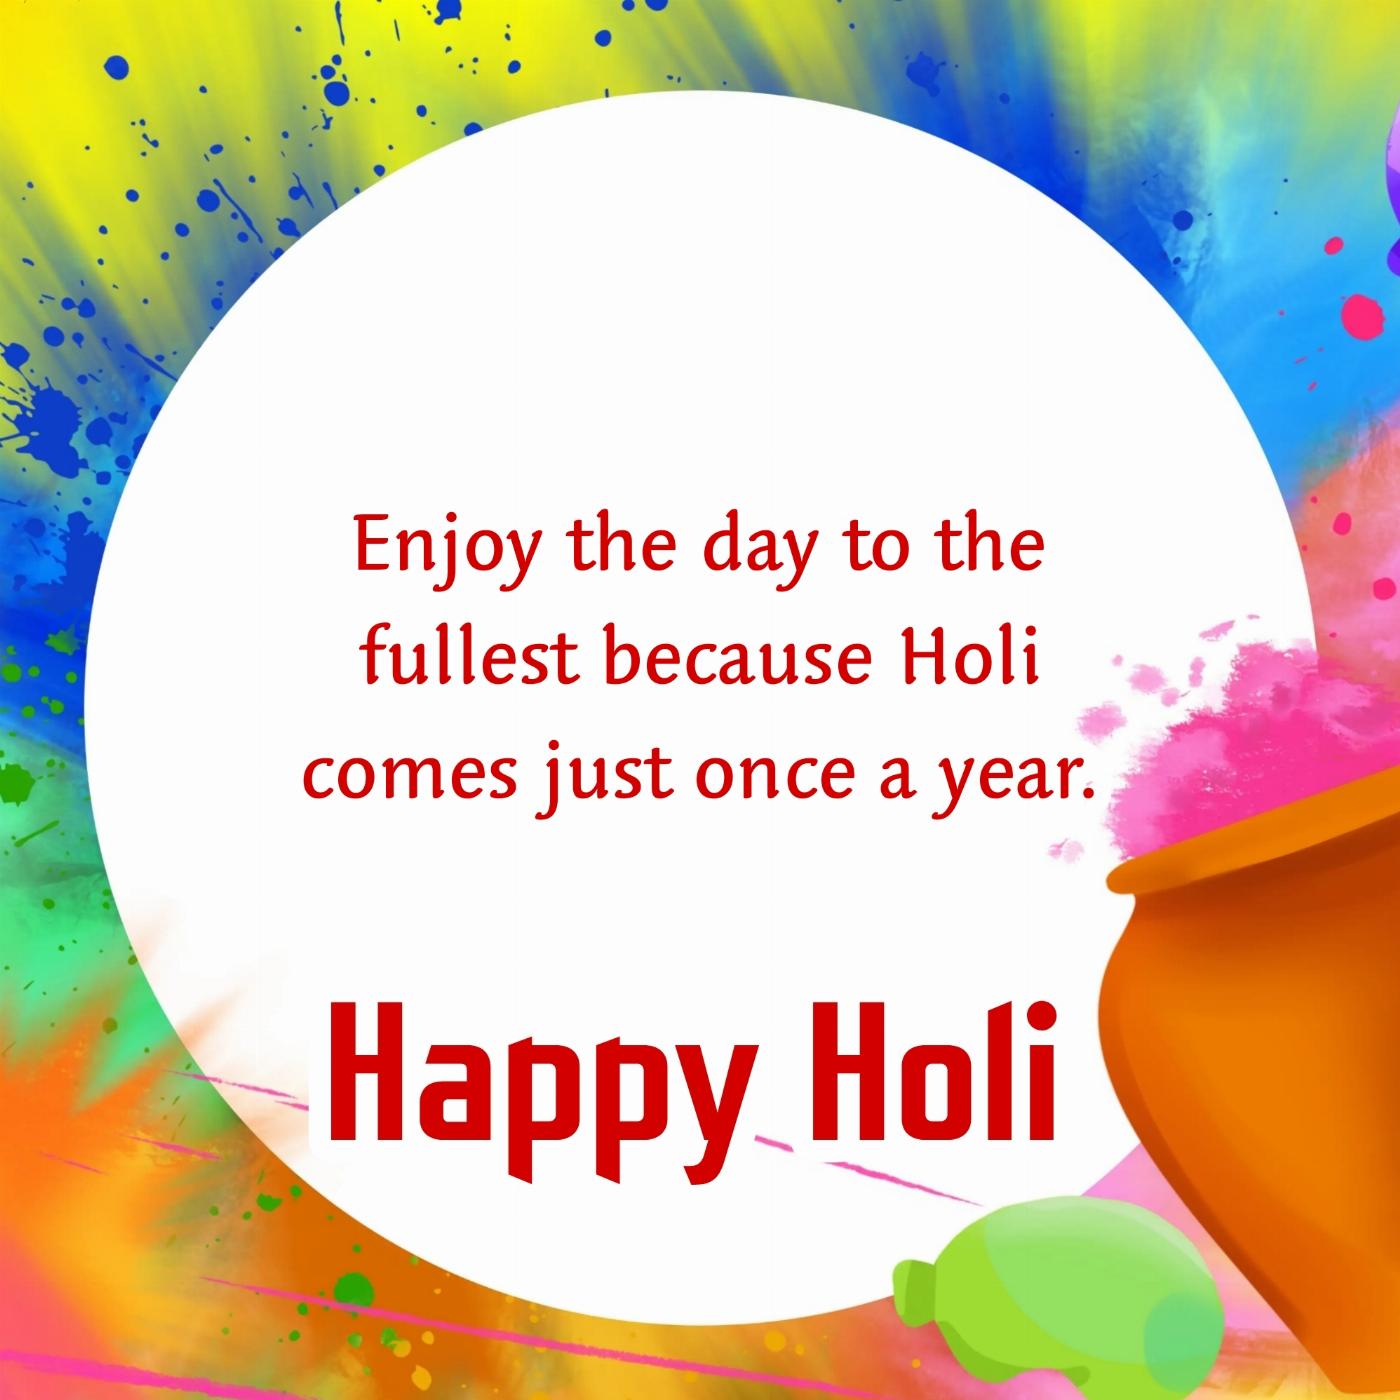 Happy Holi Wishes Images in English